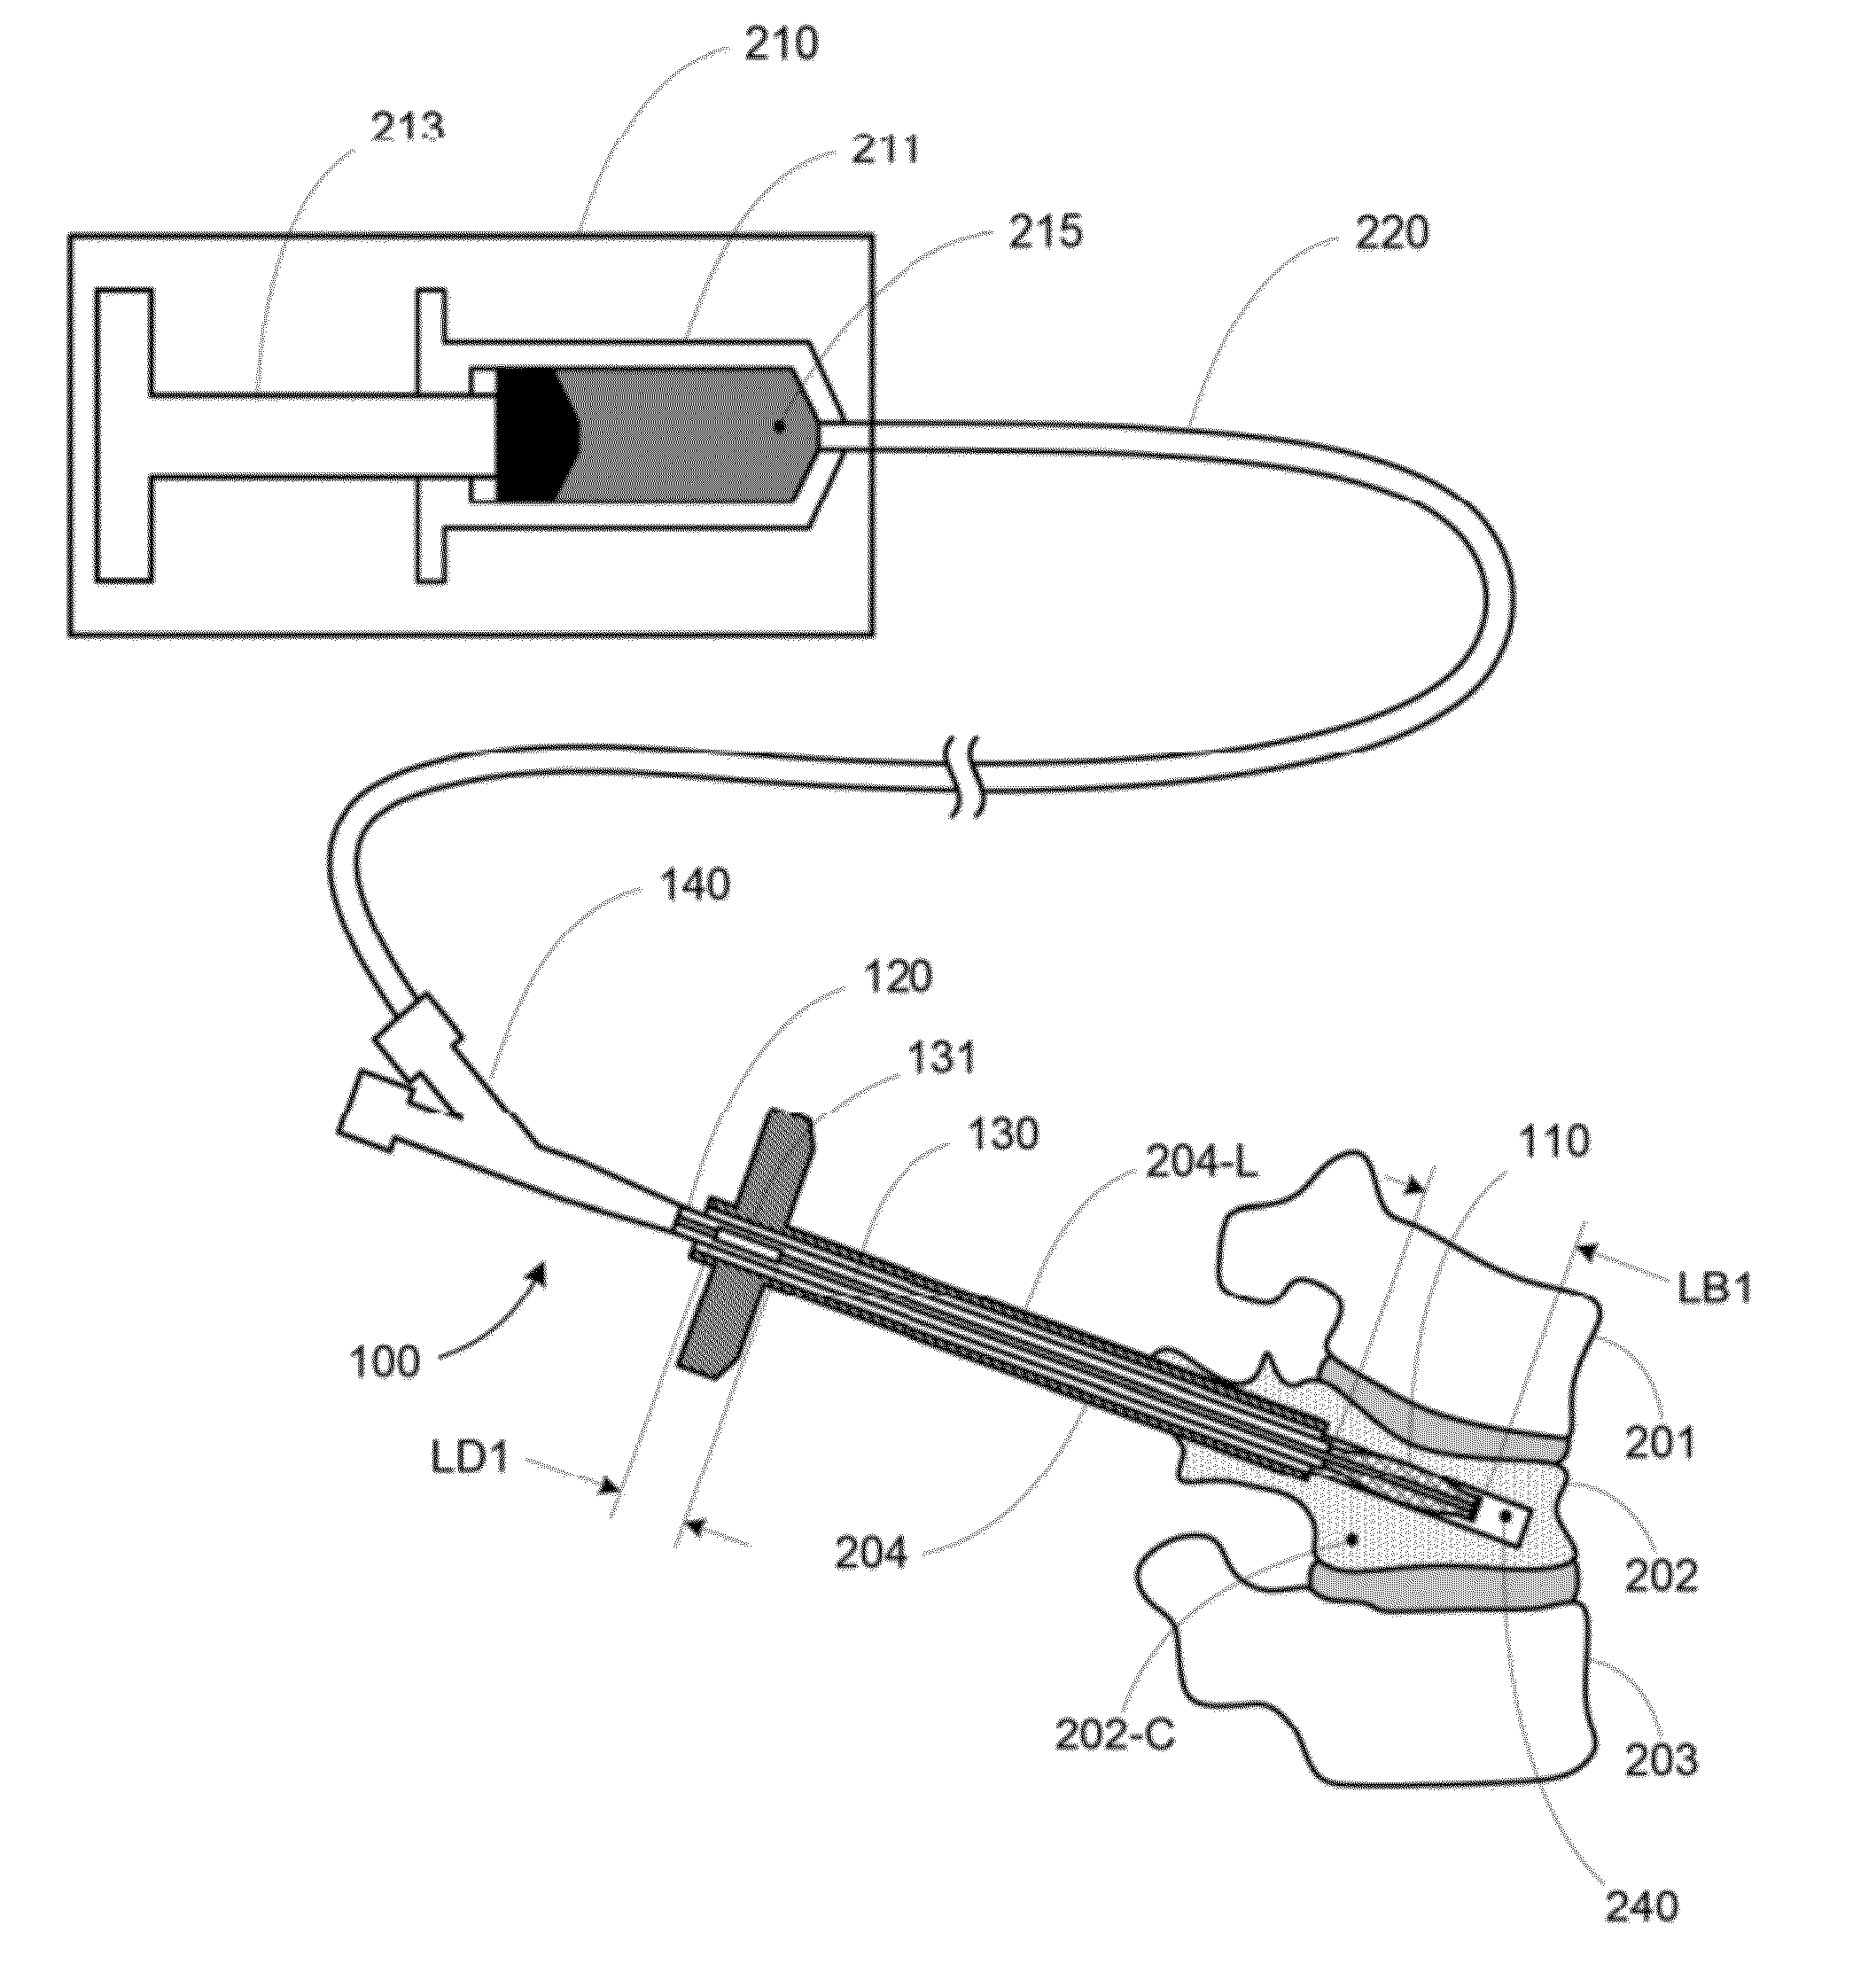 Inflatable bone TAMP with predetermined extensibility